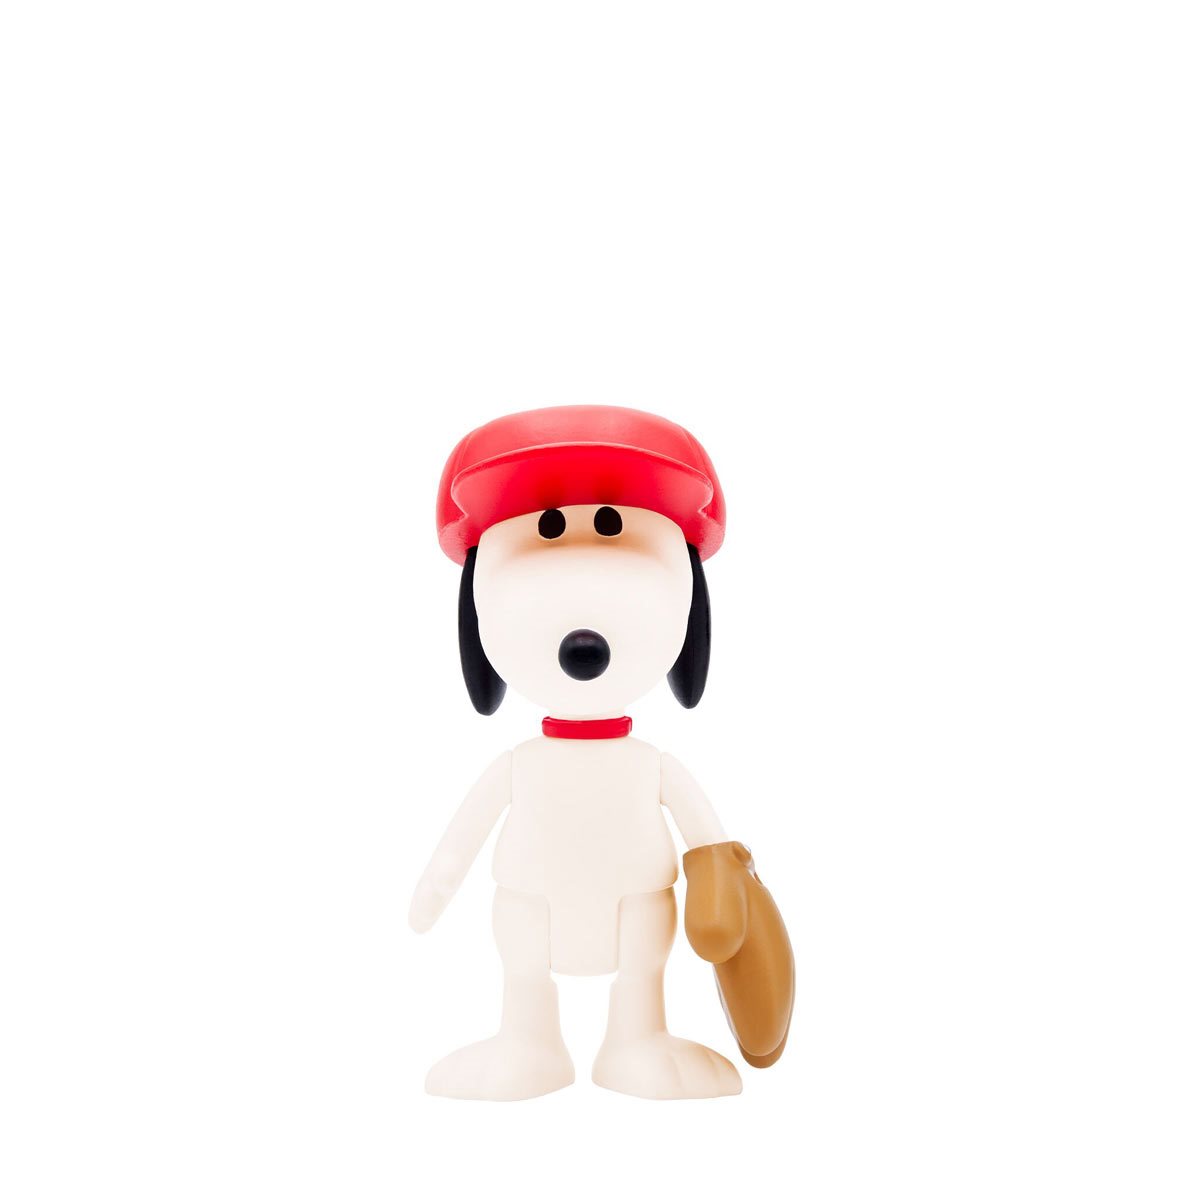 Peanuts Surfer Snoopy 3 3/4-Inch ReAction Figure